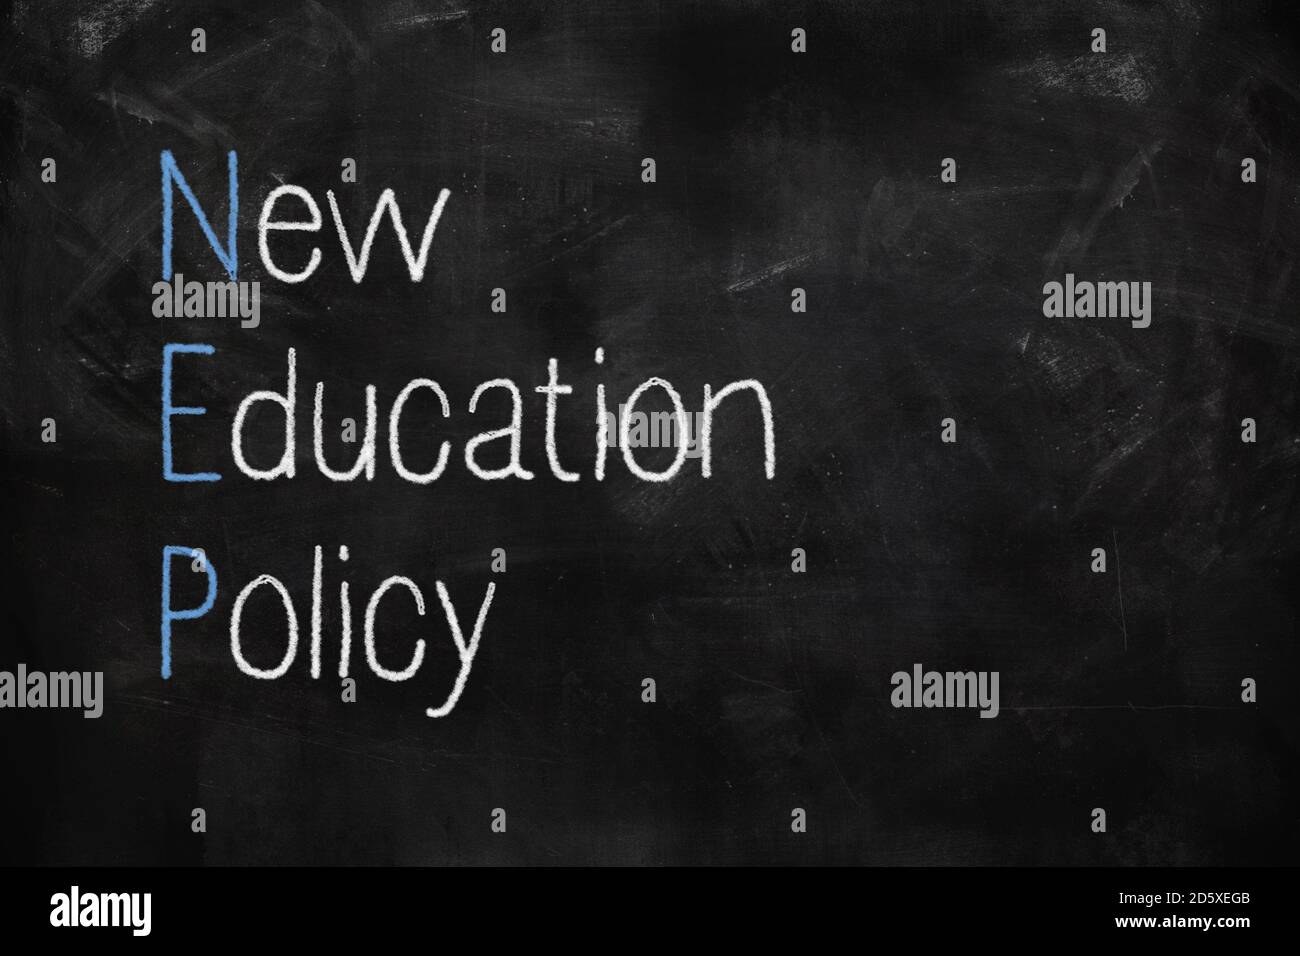 New education policy written with white and red chalk on blackboard in classroom Stock Photo